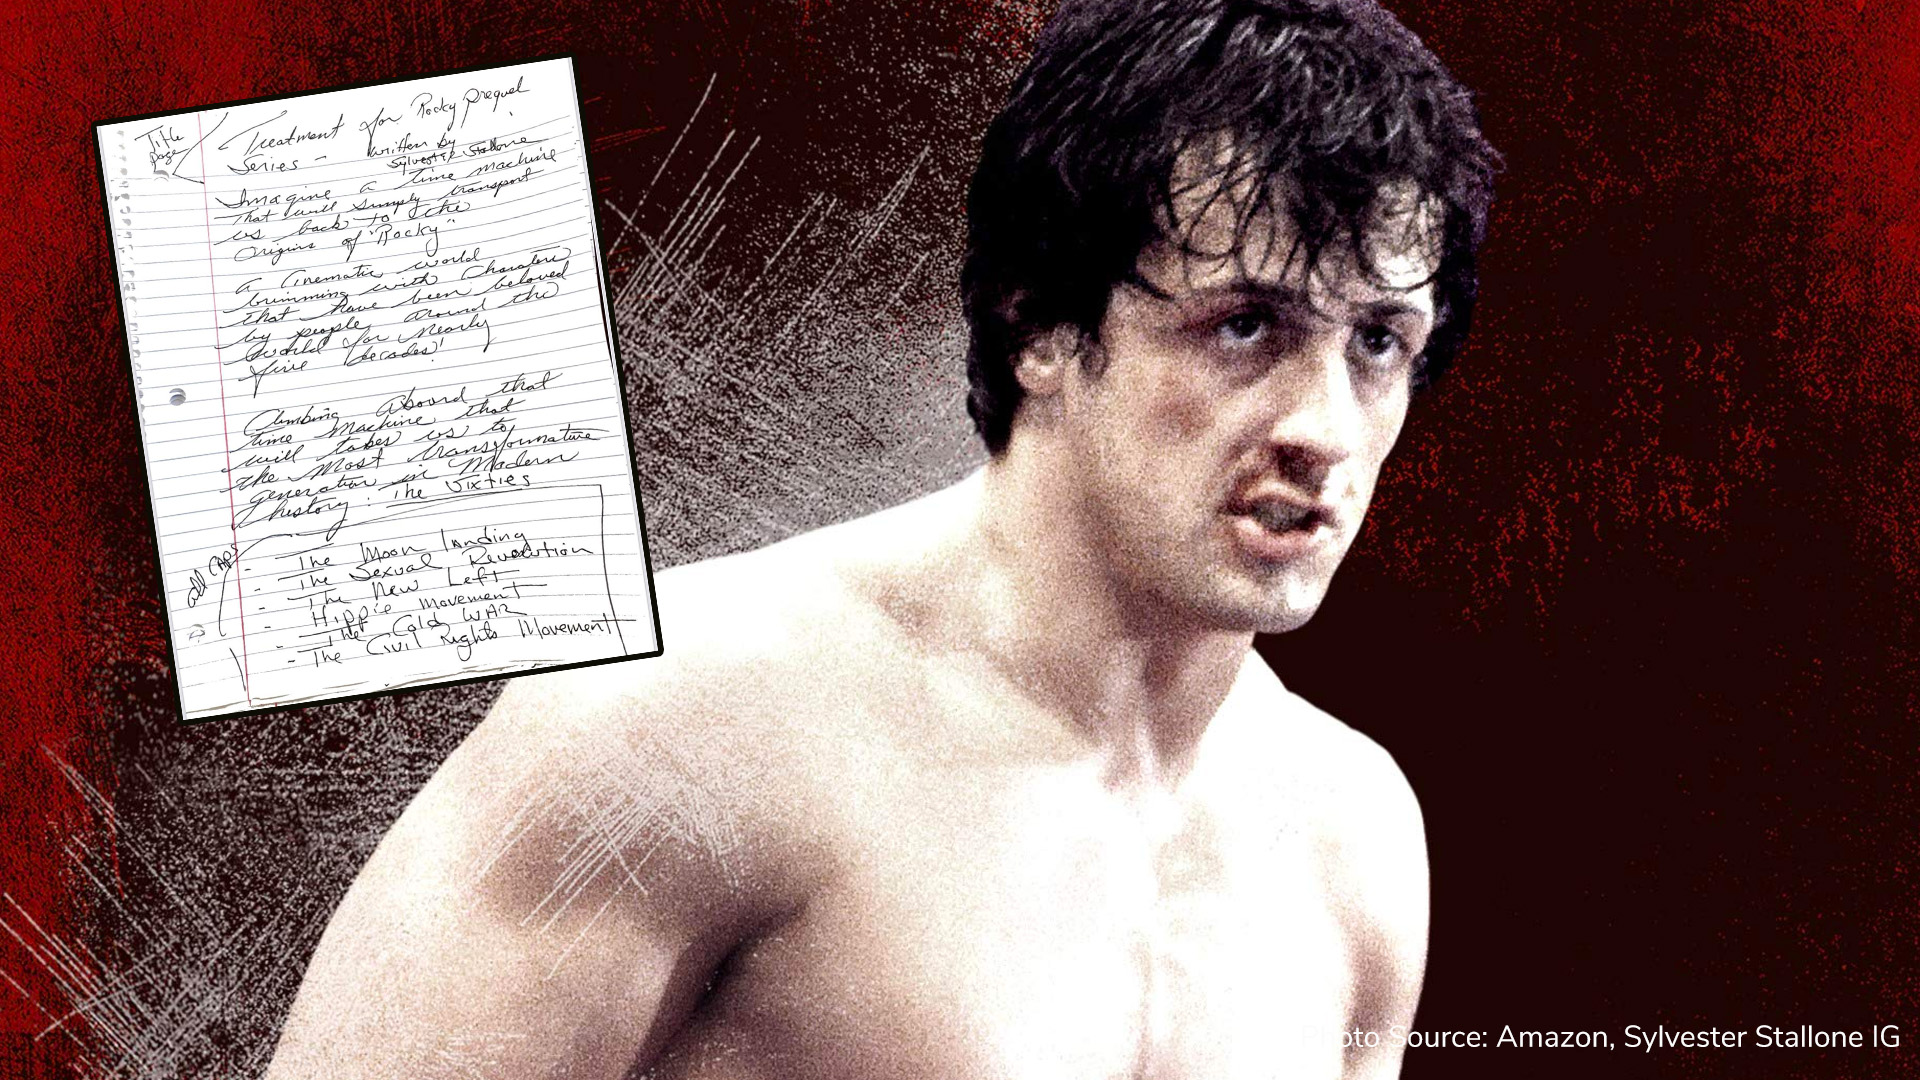 Sylvester Stallone working on Rocky prequel TV series